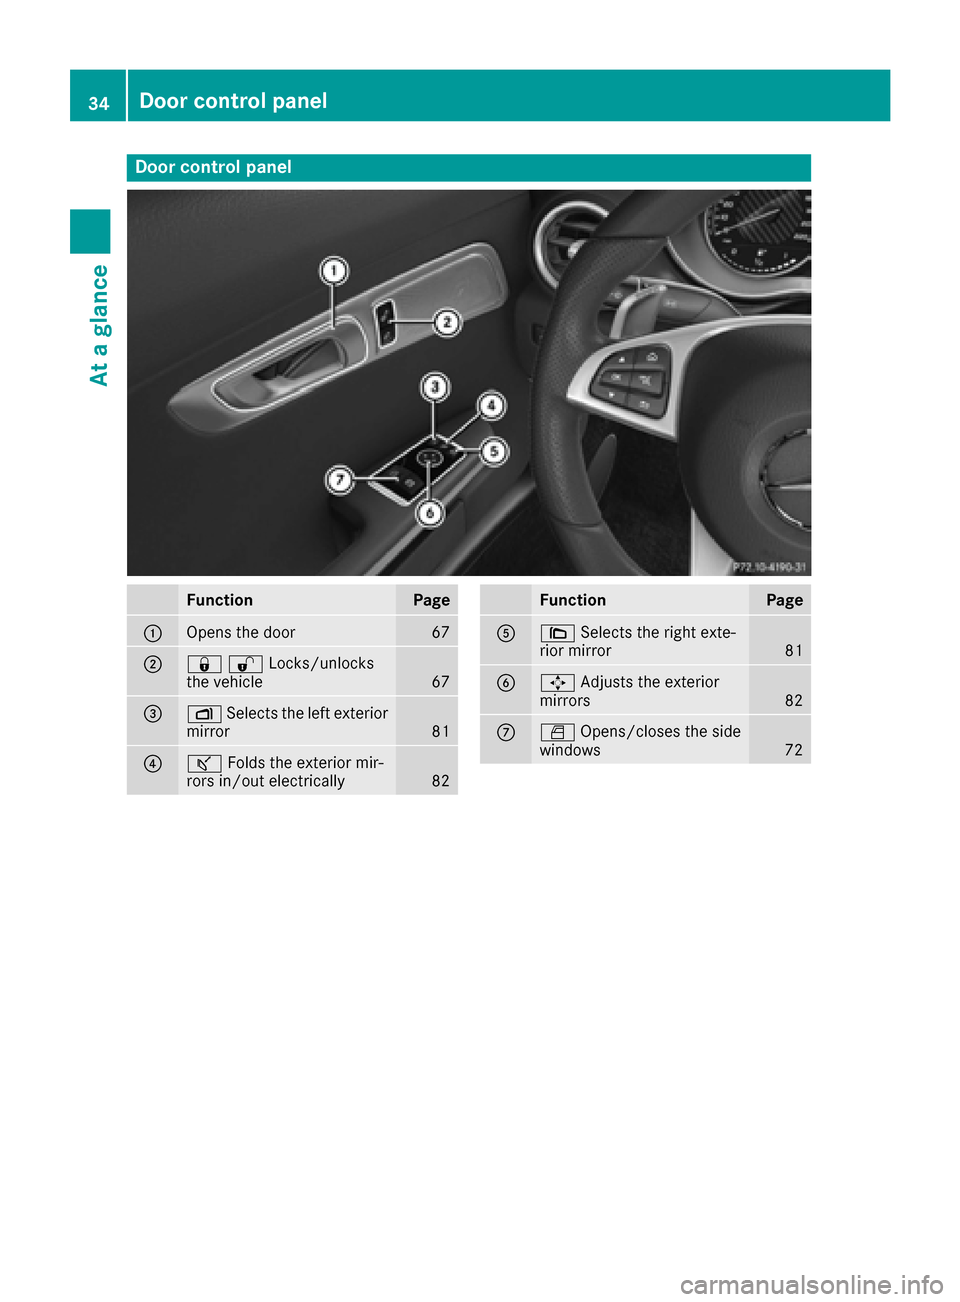 MERCEDES-BENZ AMG GT S 2016 C190 Owners Guide Door controlpanel
FunctionPage
:Opens th edoo r67
;&%Locks/unlocks
the vehicle67
=Z Selects the left exterior
mirror81
?ª Folds the exterior mir-
rors in/out electrically82
FunctionPage
A\ Selects th